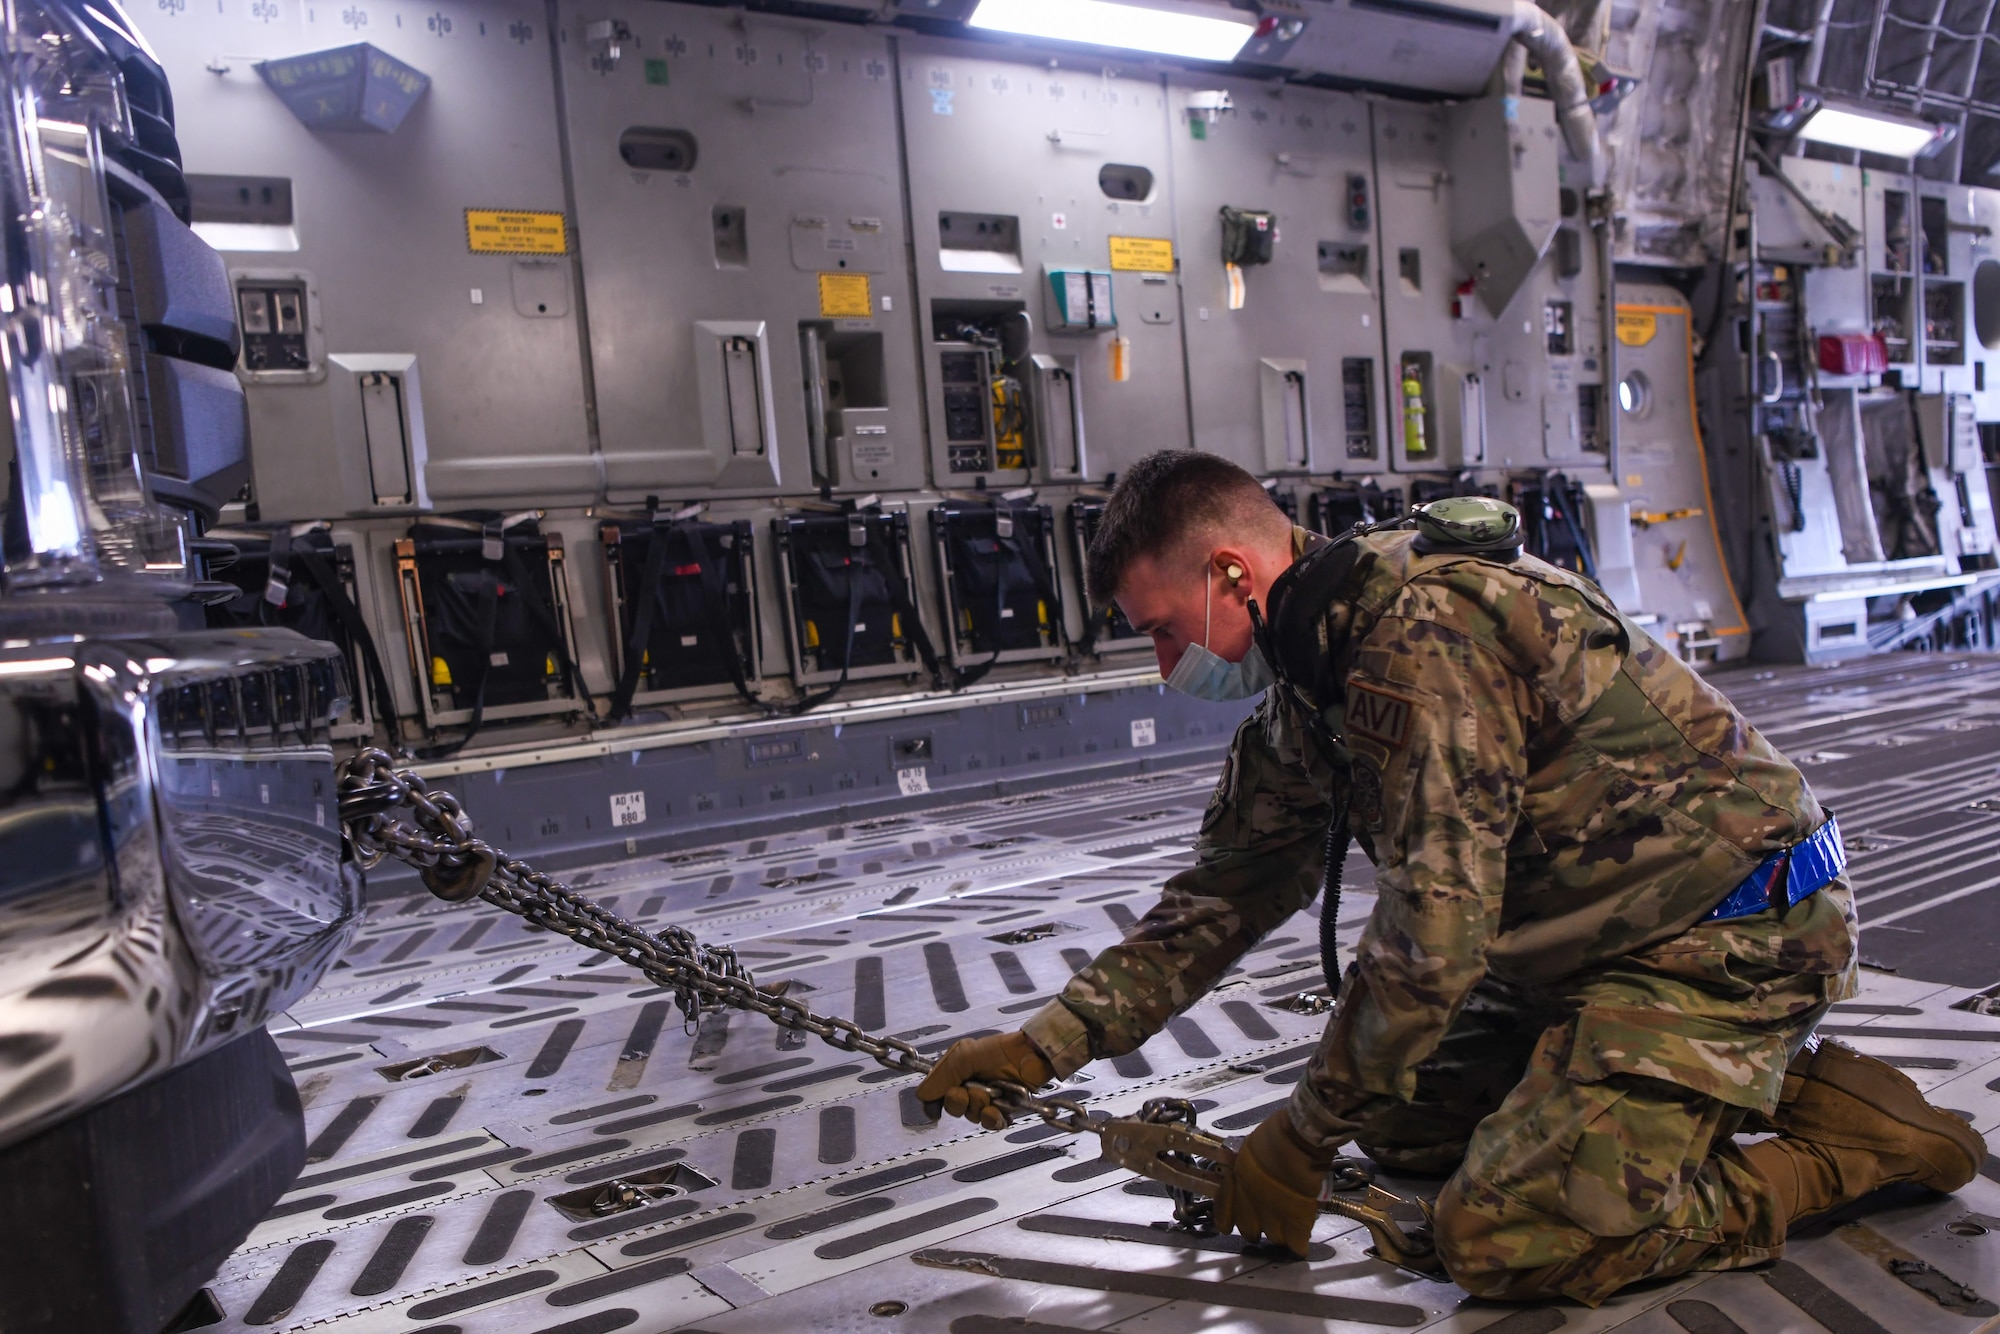 U.S. Air Force Staff Sgt. Joshua Goodhart, a 732nd Air Mobility Squadron avionics technician, fastens a tie-down restraint after loading a truck onto a C-17 Globemaster III during the Nodal Lightning exercise at Ted Stevens International Airport in Anchorage, Alaska, Oct. 19, 2021. The Nodal Lightning exercise allowed 732nd AMS personnel to respond efficiently and effectively to contested or degraded contingency environments.